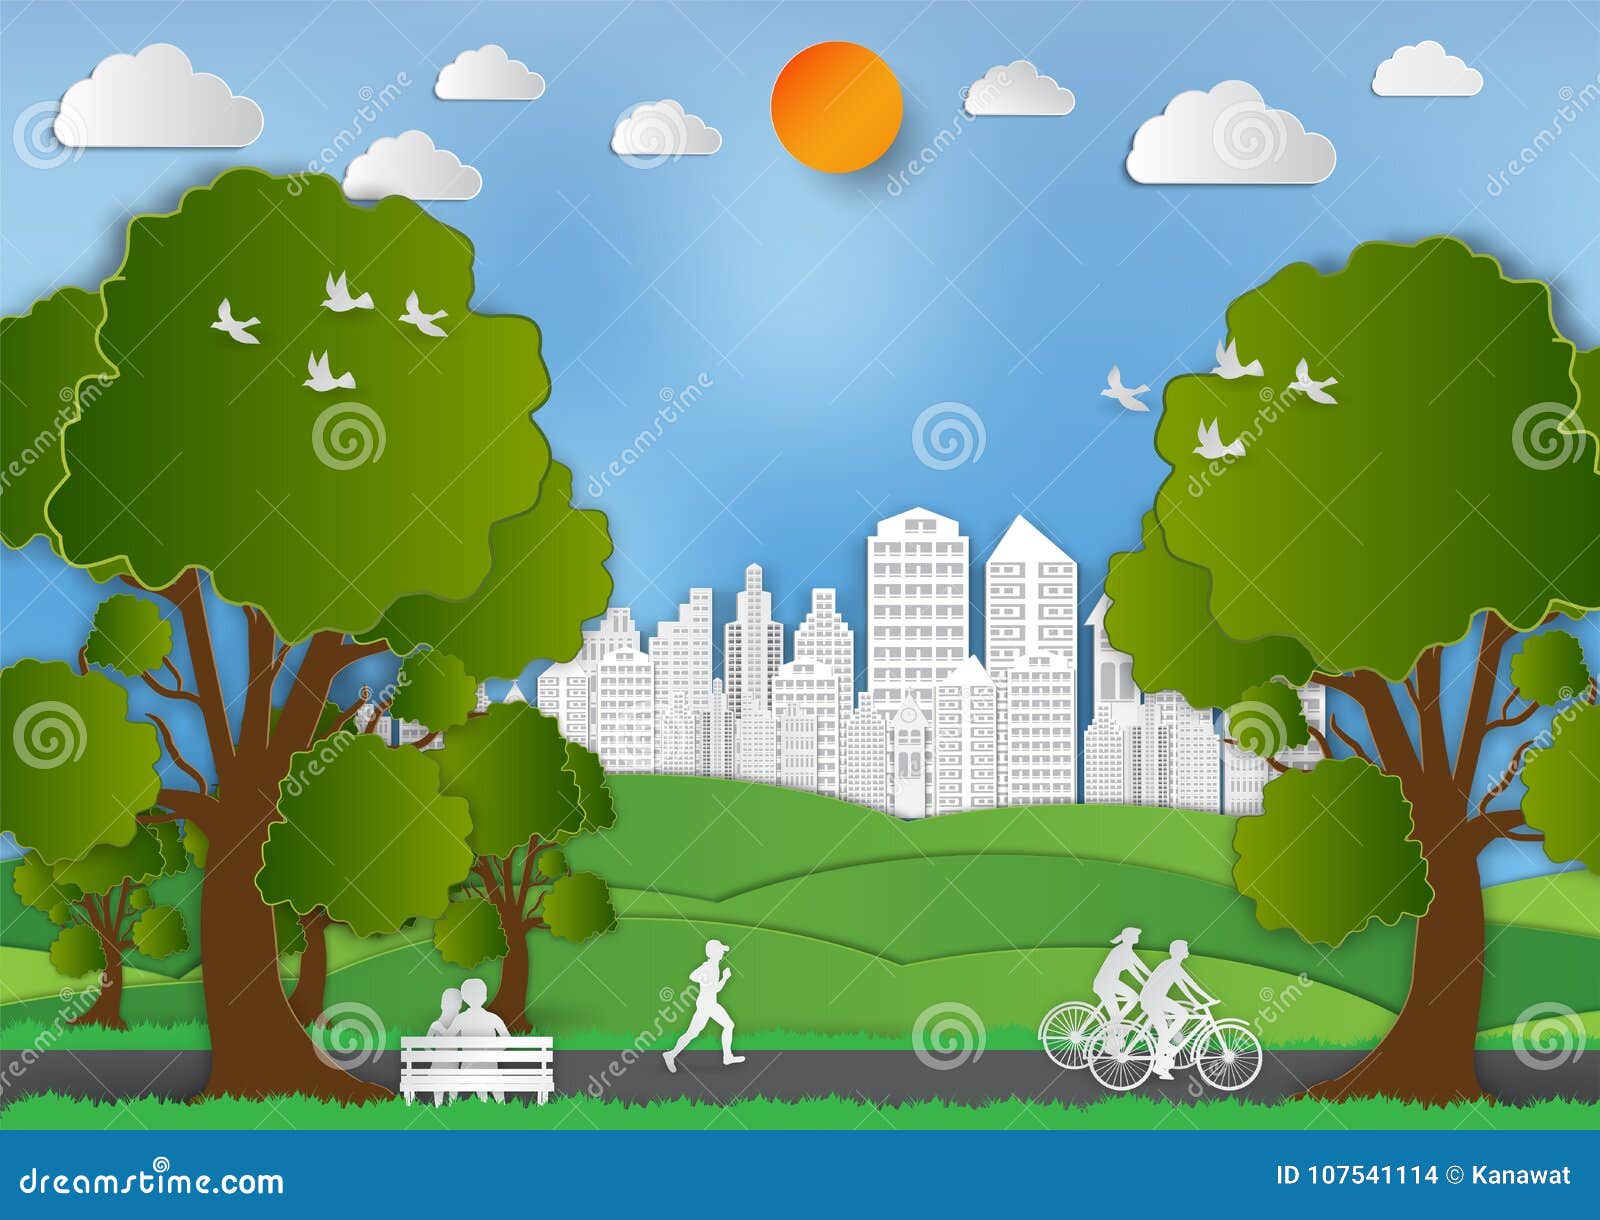 paper art style of landscape and people in city parks to save the world idea, abstract  background